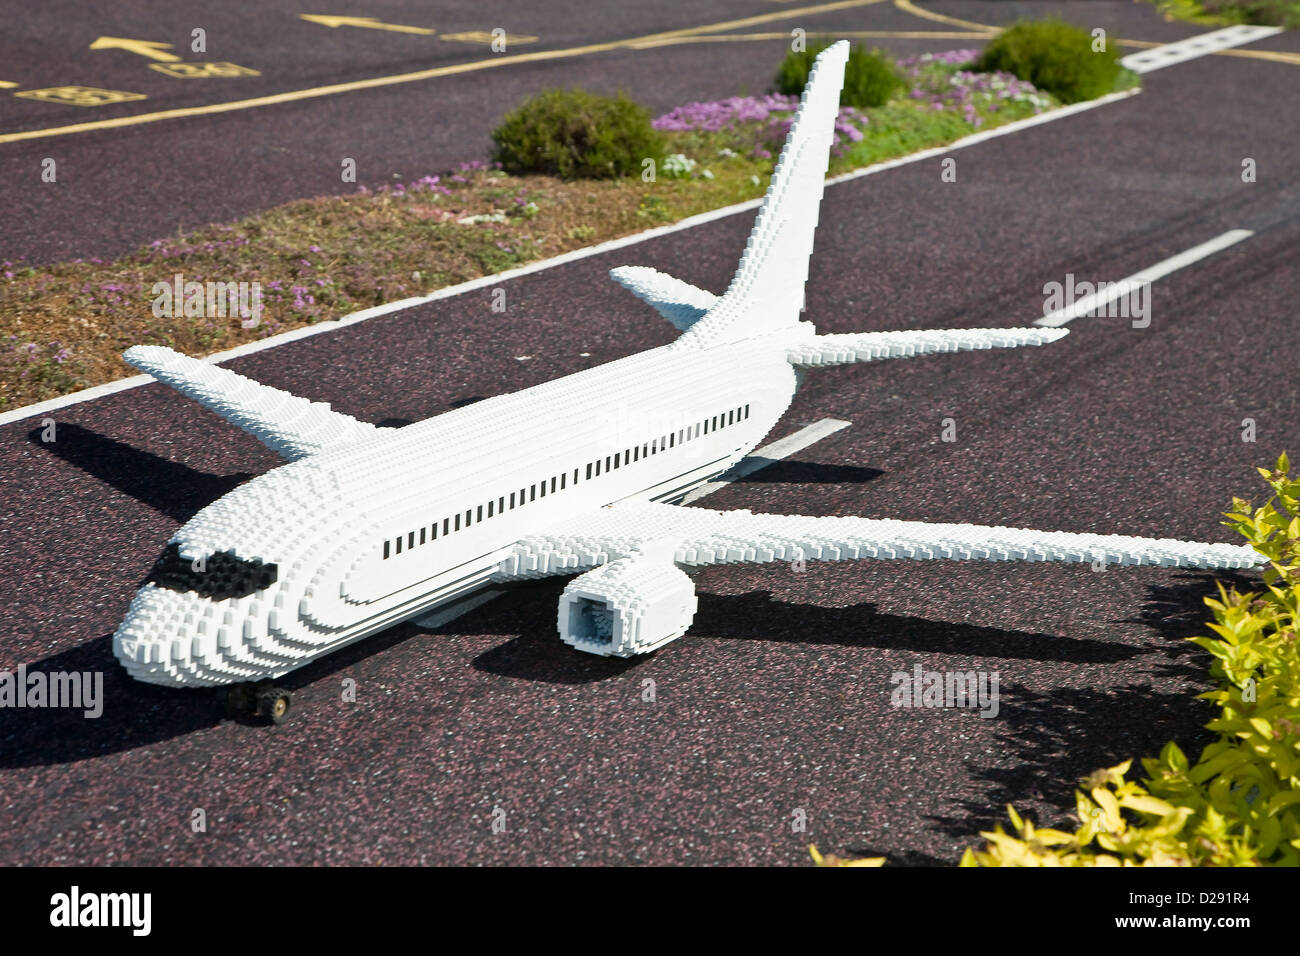 Lego Aircraft High Resolution Stock Photography and Images - Alamy